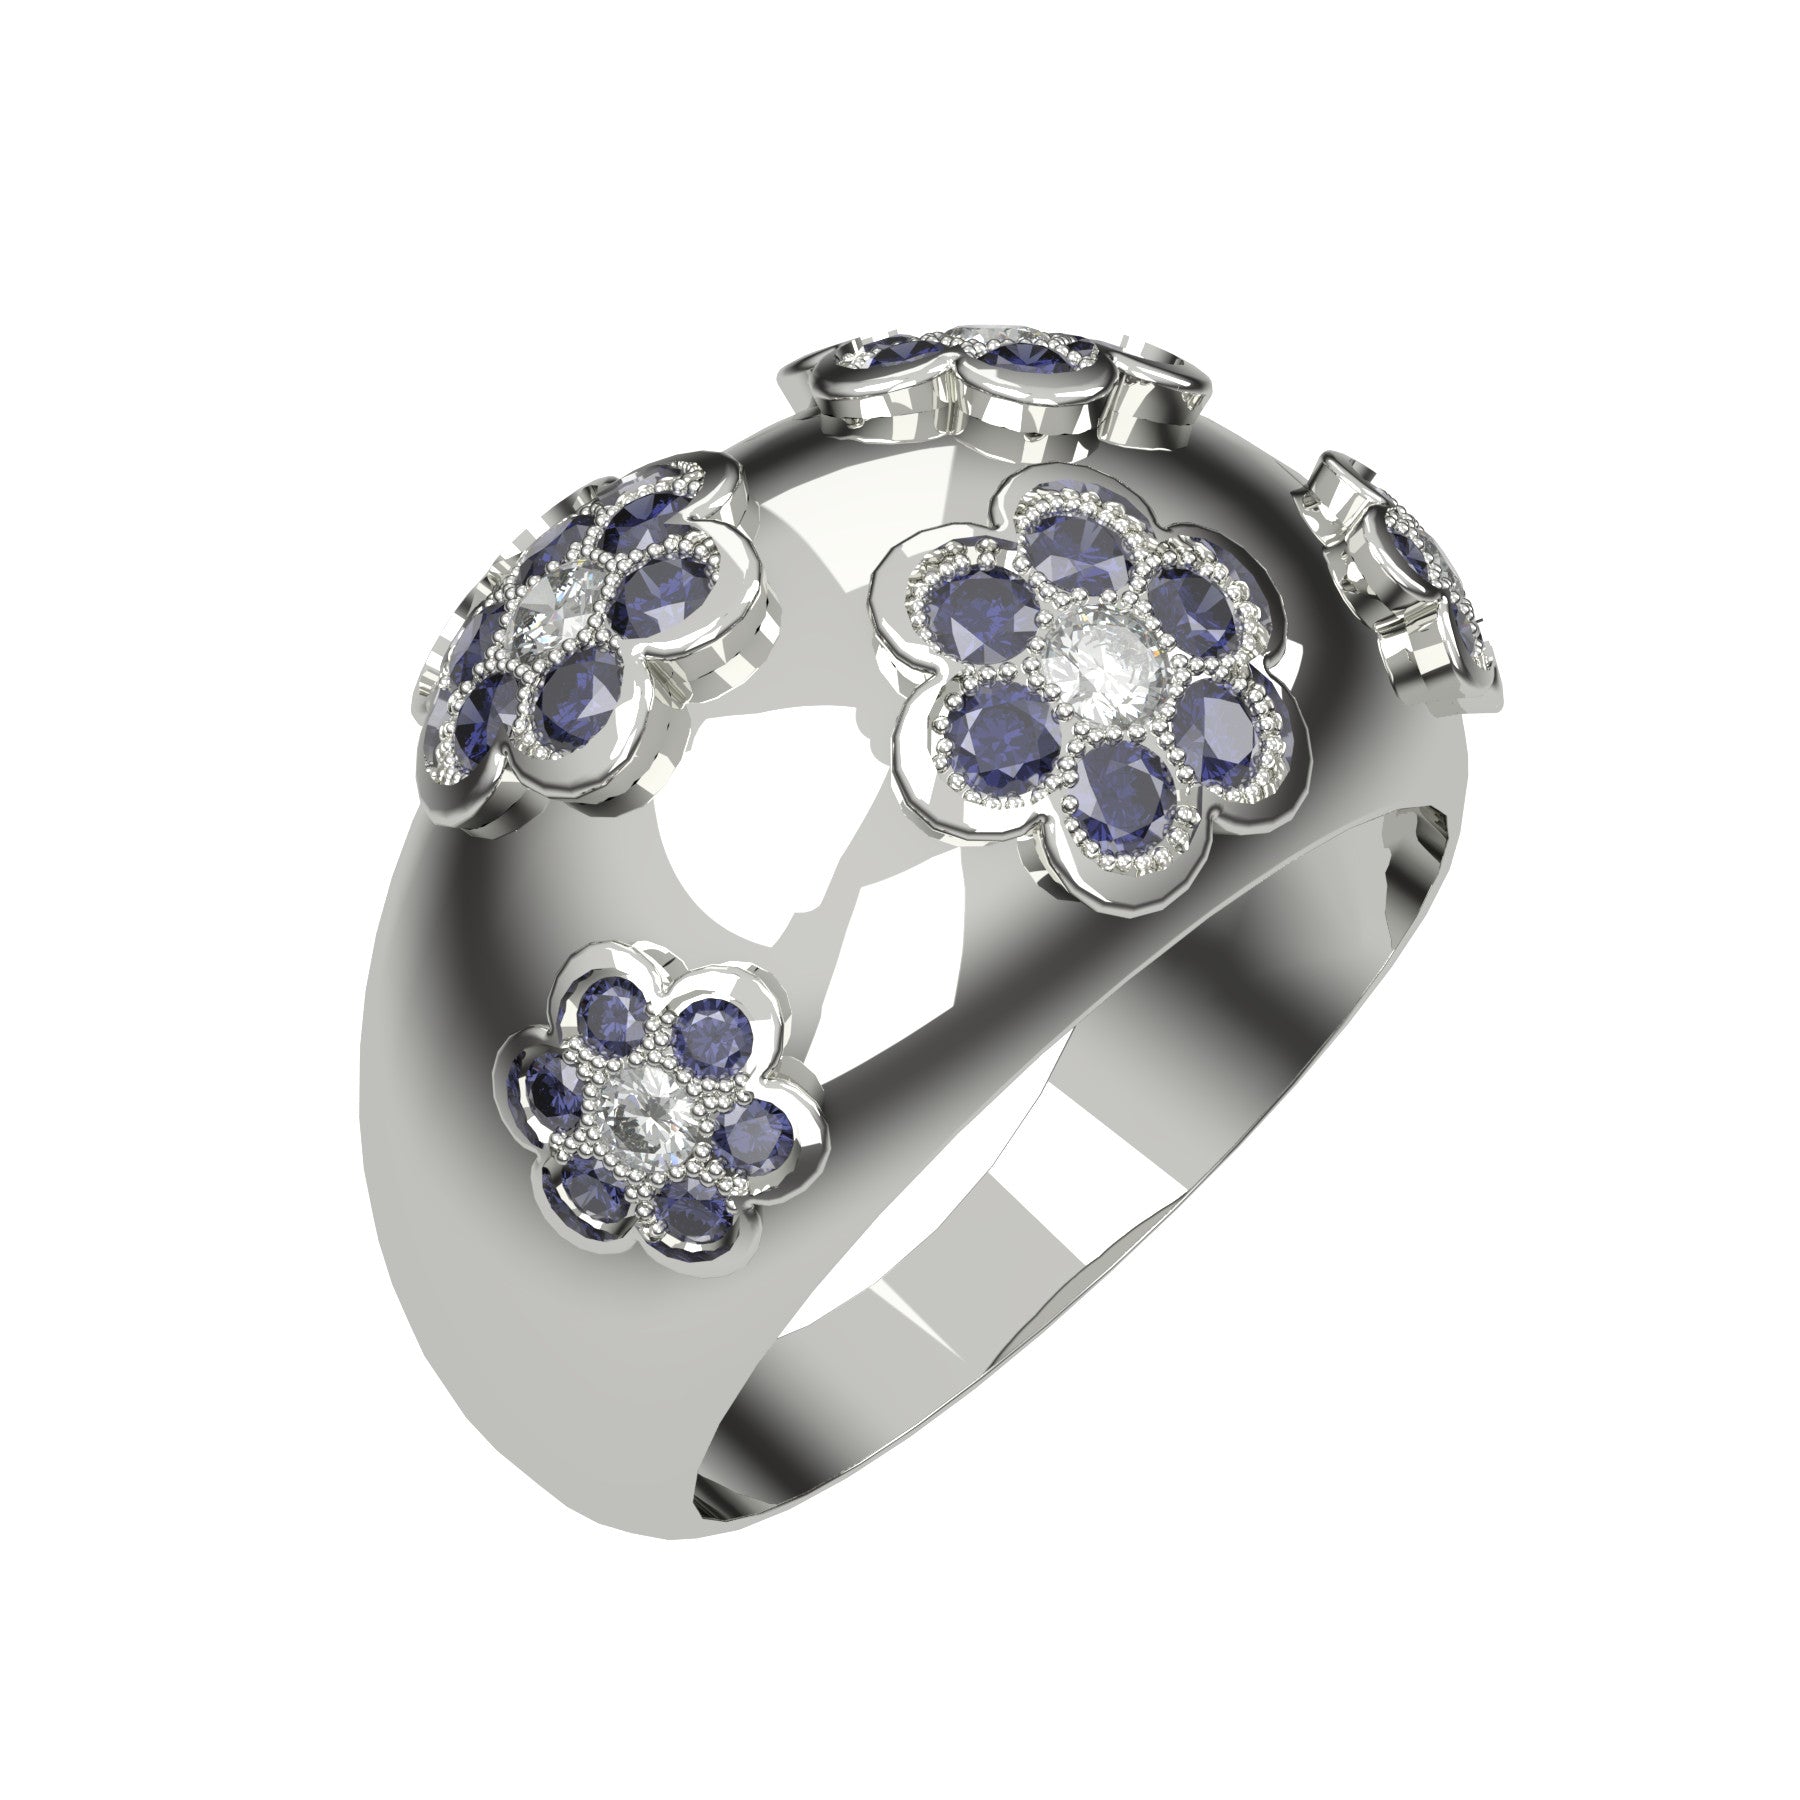 Blooming band ring, natural round diamonds, natural round sapphires, 18 k white gold, weight about 7,50 g (0.26 oz), width 12 mm max